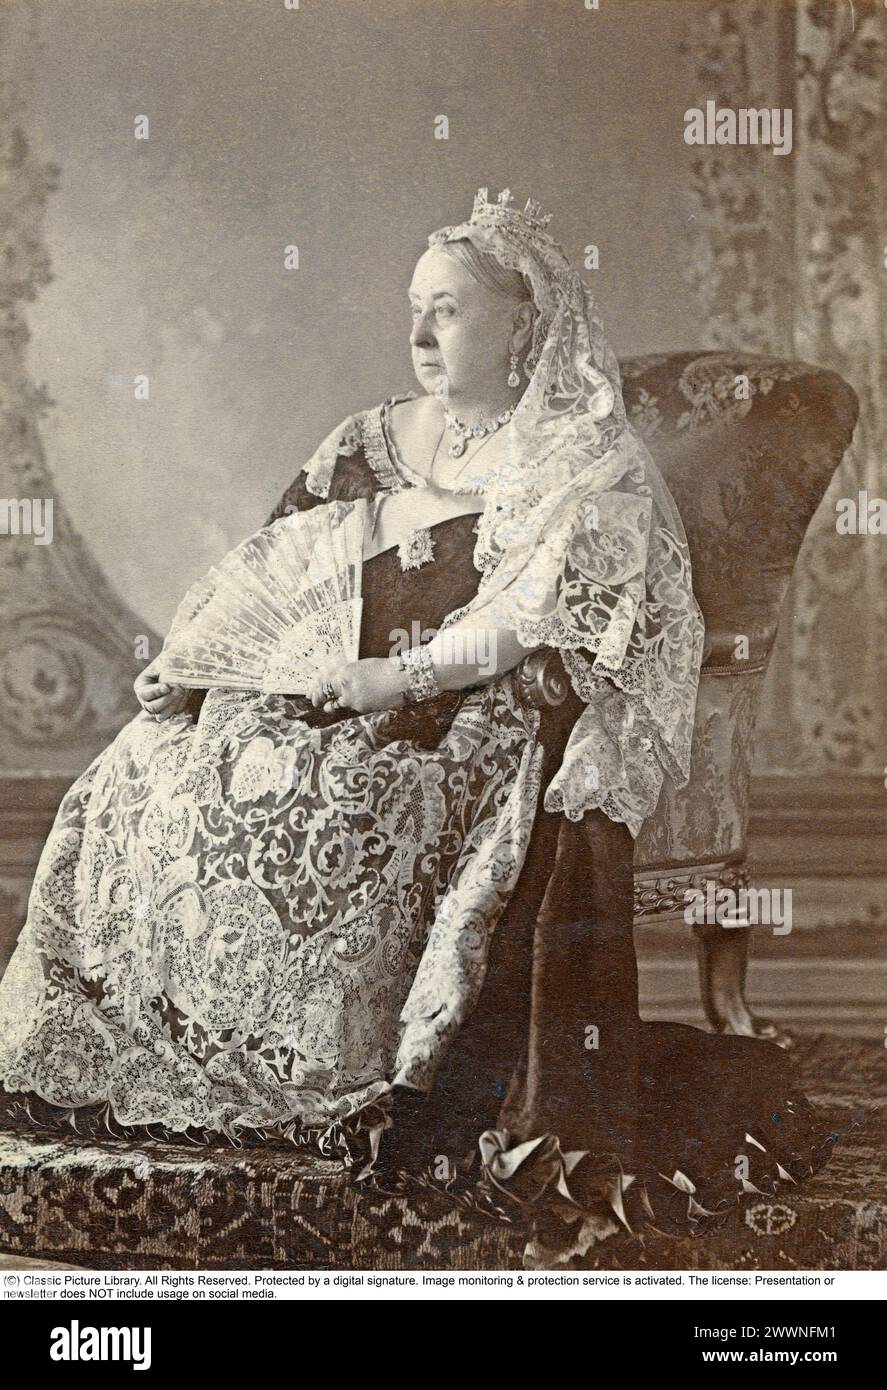 Queen Victoria (Alexandrina Victoria; 24 May 1819 – 22 January 1901) was Queen of the United Kingdom of Great Britain and Ireland from 20 June 1837 until her death in 1901. Her reign of 63 years and 216 days, which was longer than those of any of her predecessors, is known as the Victorian era. Picture taken 1893. Stock Photo